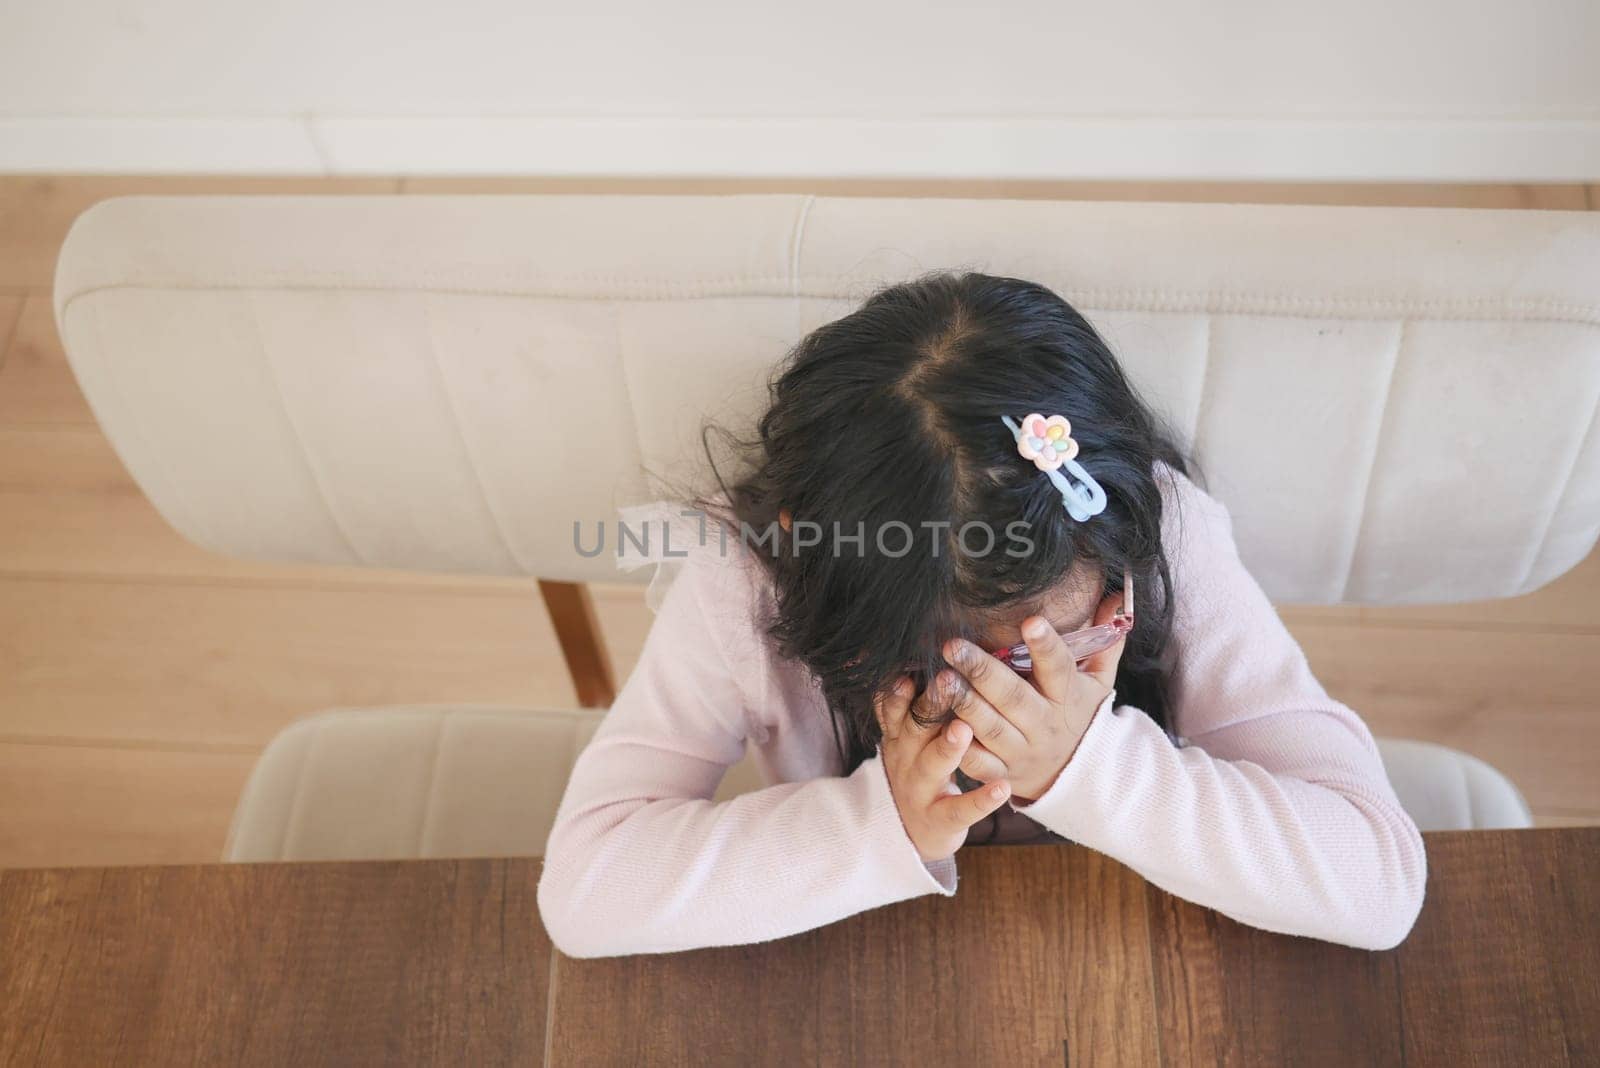 a upset child girl cover her face with hand .